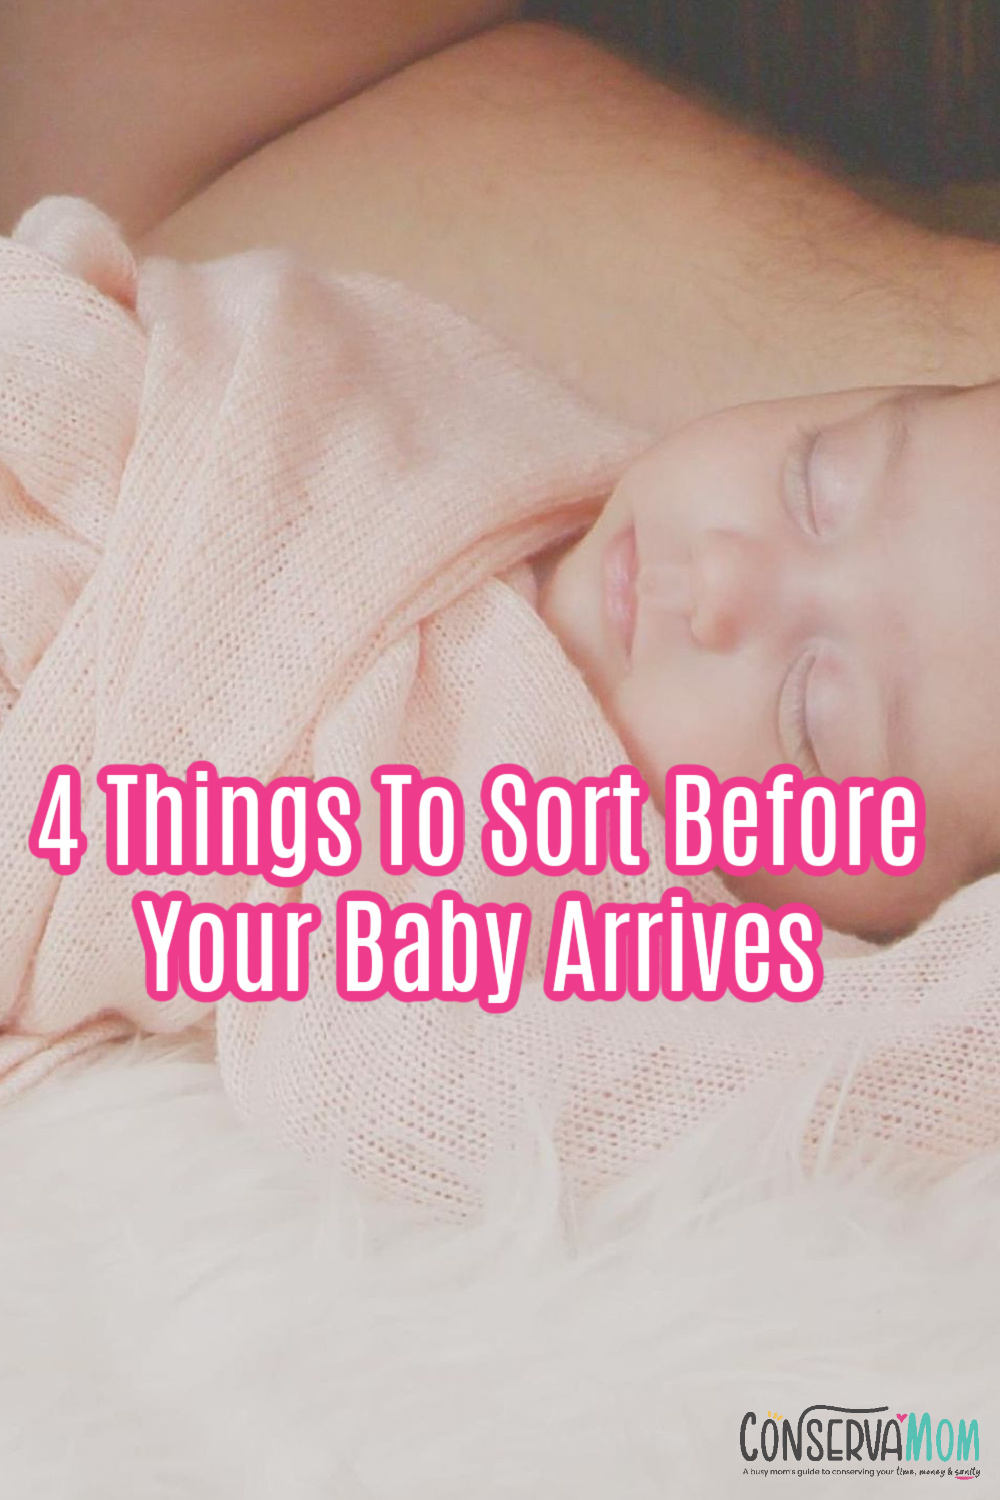 4 Things To Sort Before Your Baby Arrives